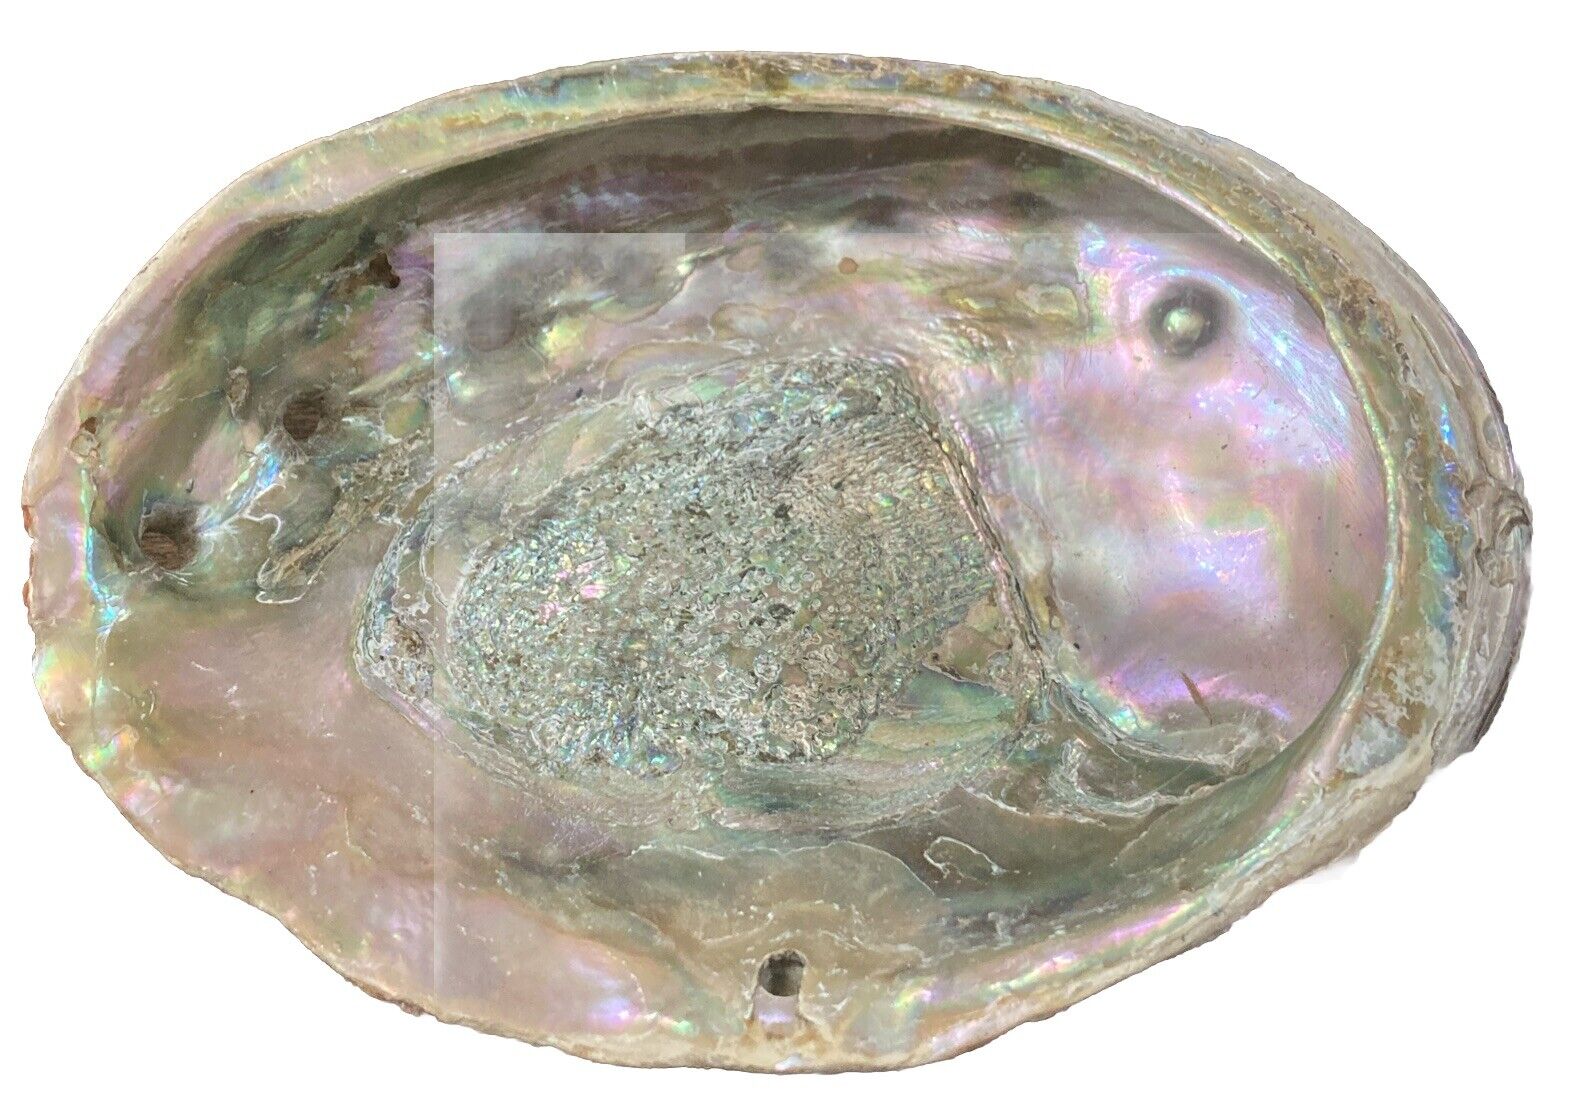 Large Vintage RED Abalone Shell for Crafts Jewlery Art Decor 7.25” X 5.5” #10